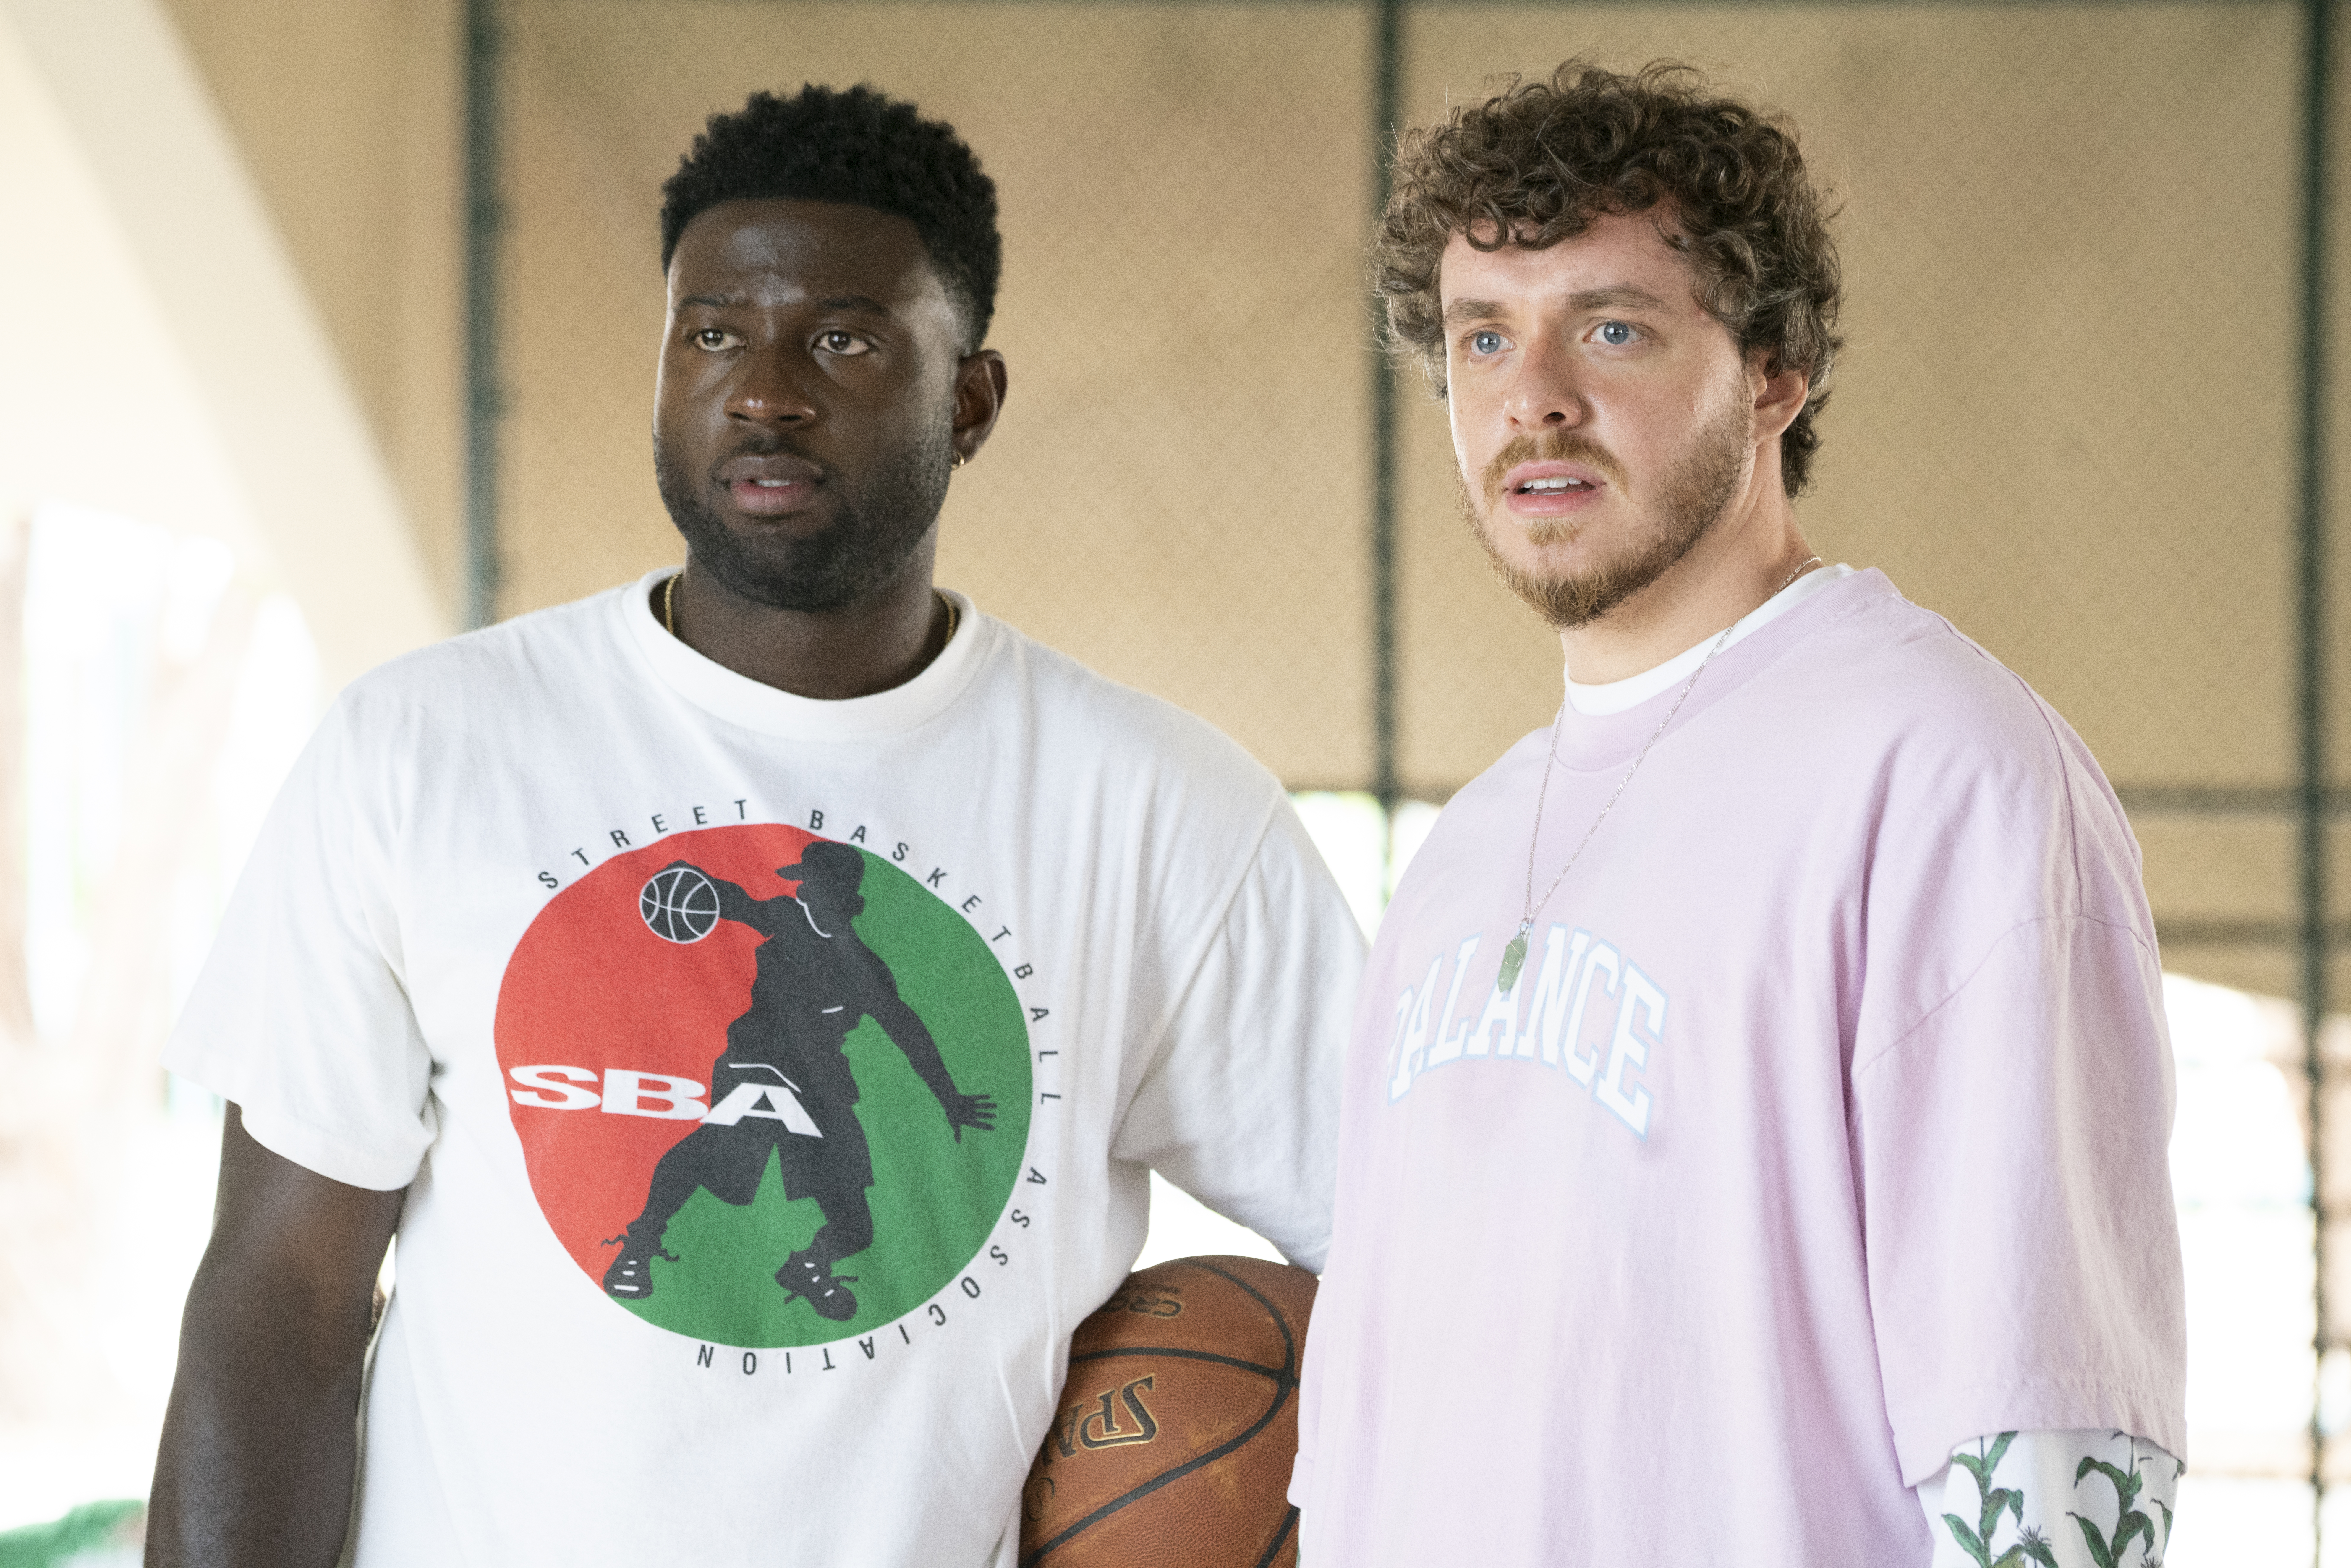 Preview Jack Harlow’s Film Debut In Hulu’s White Men Can’t Jump Trailer